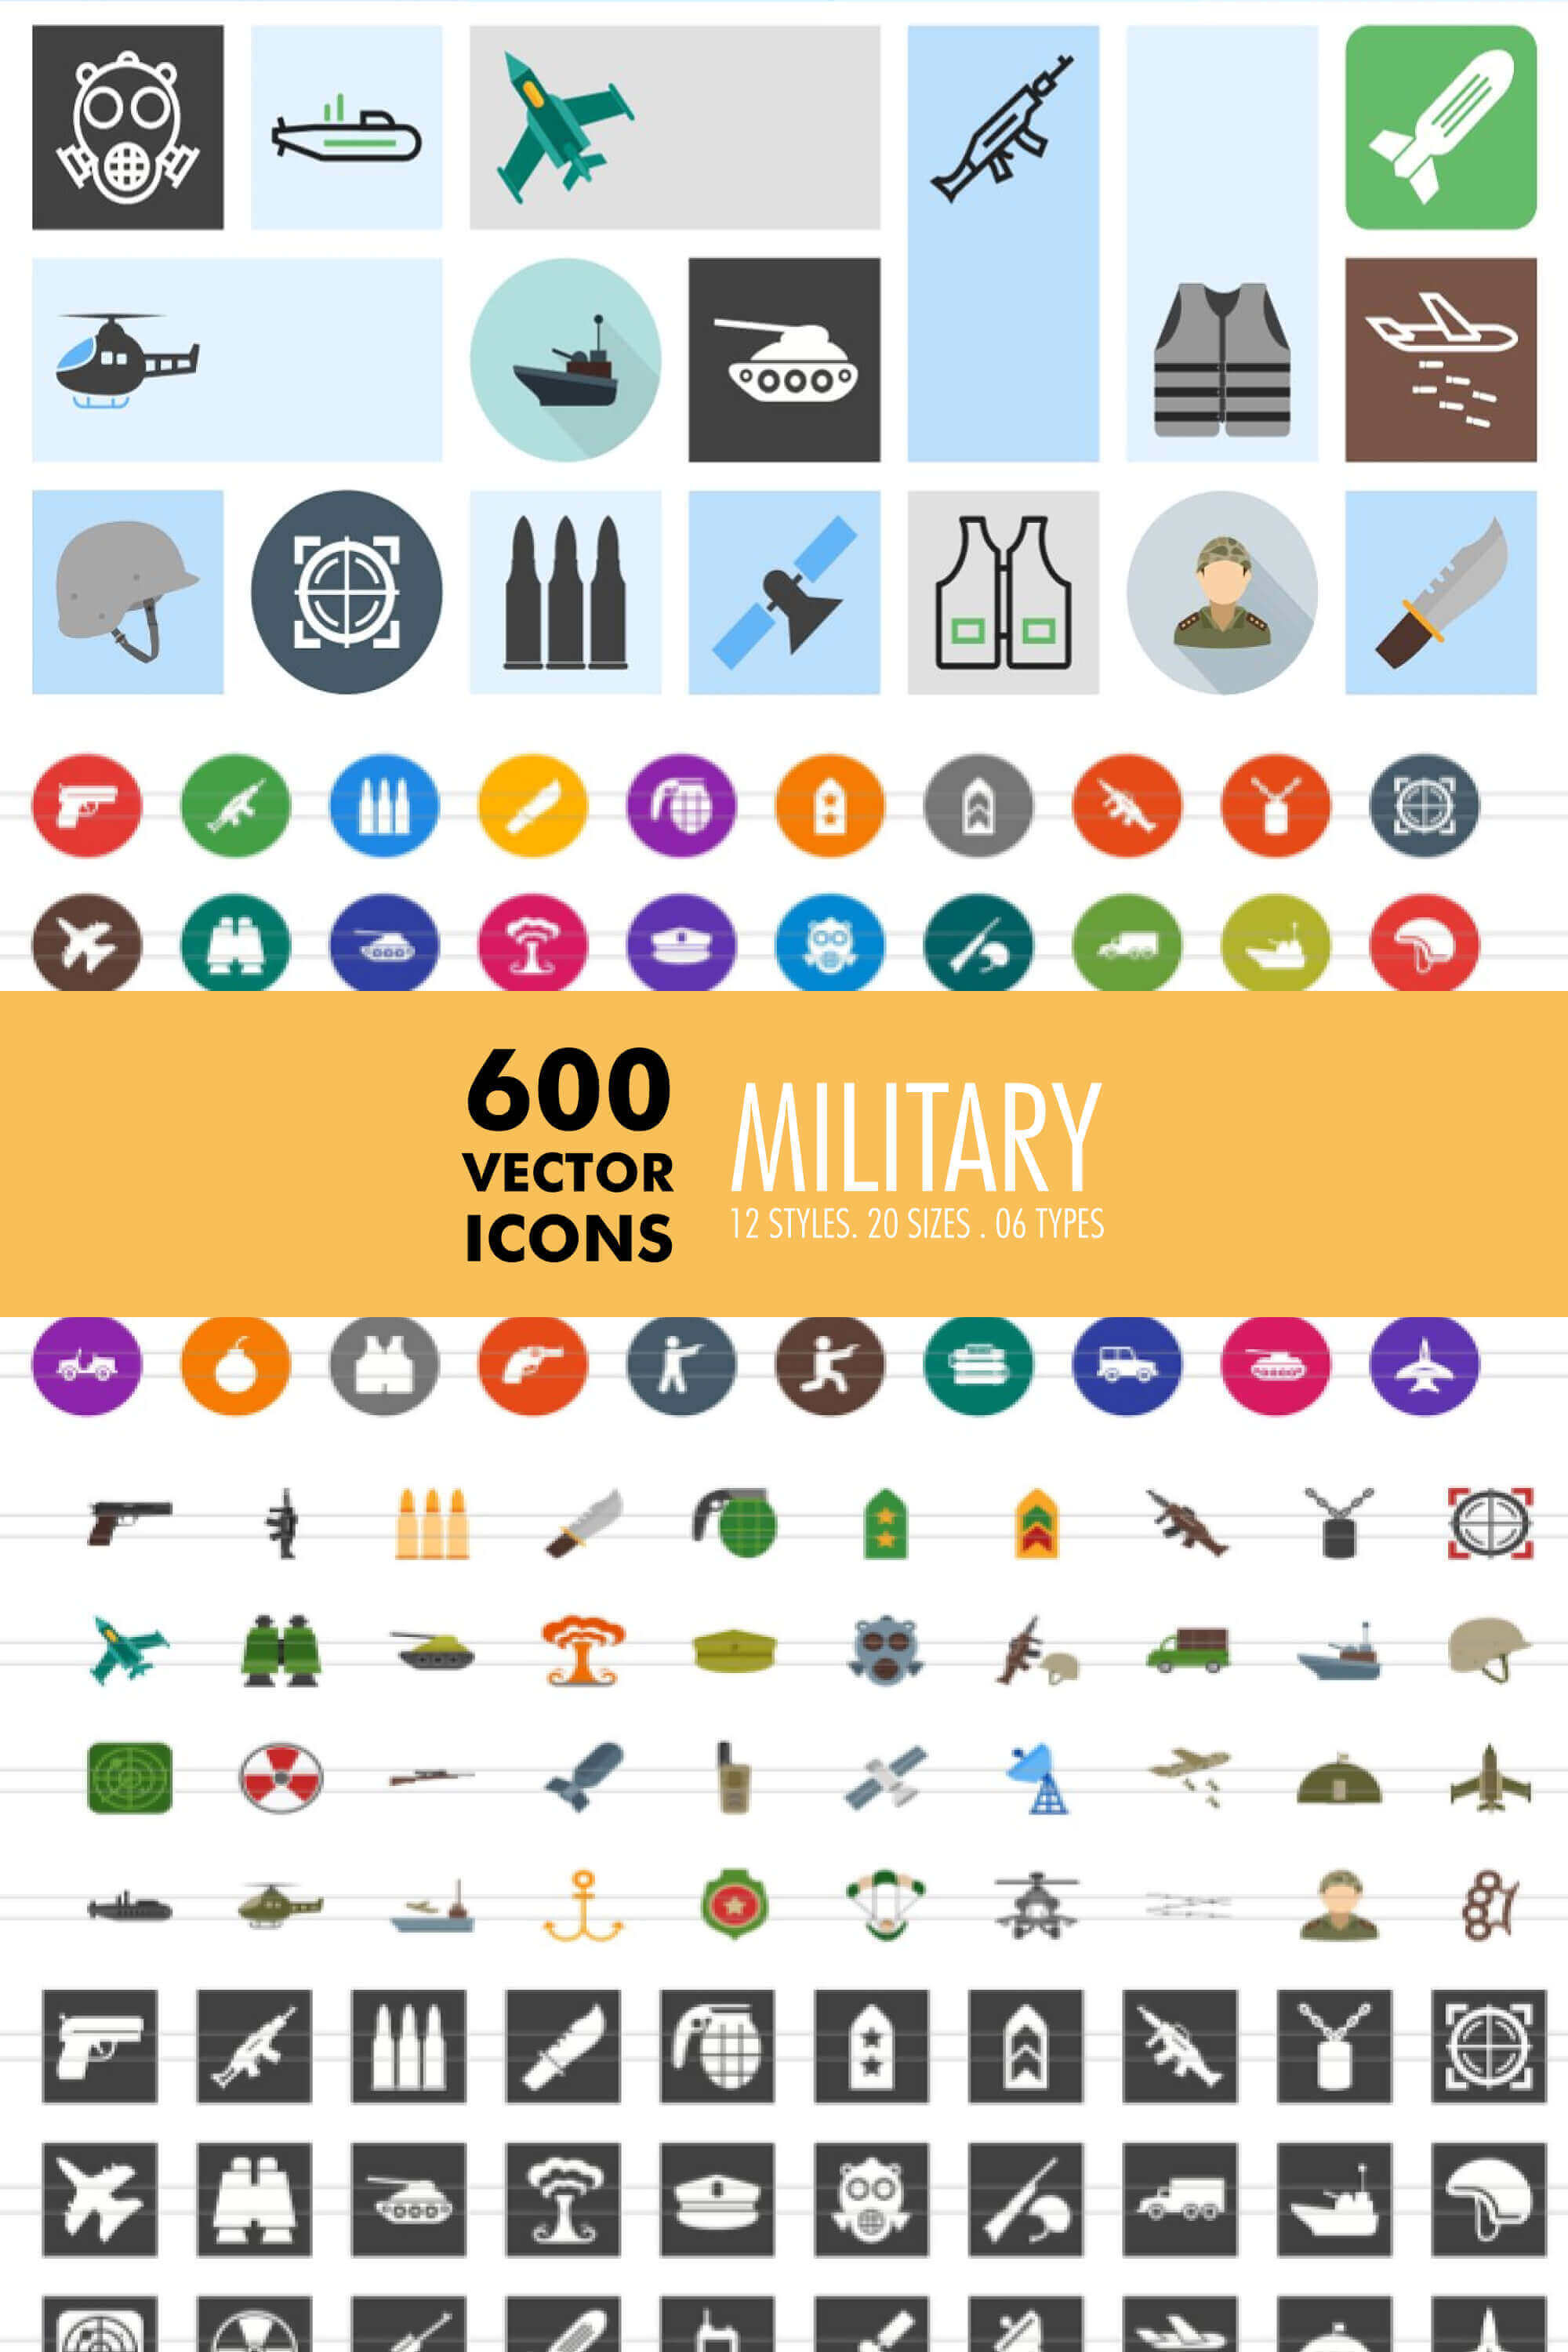 600 vector icons of military.